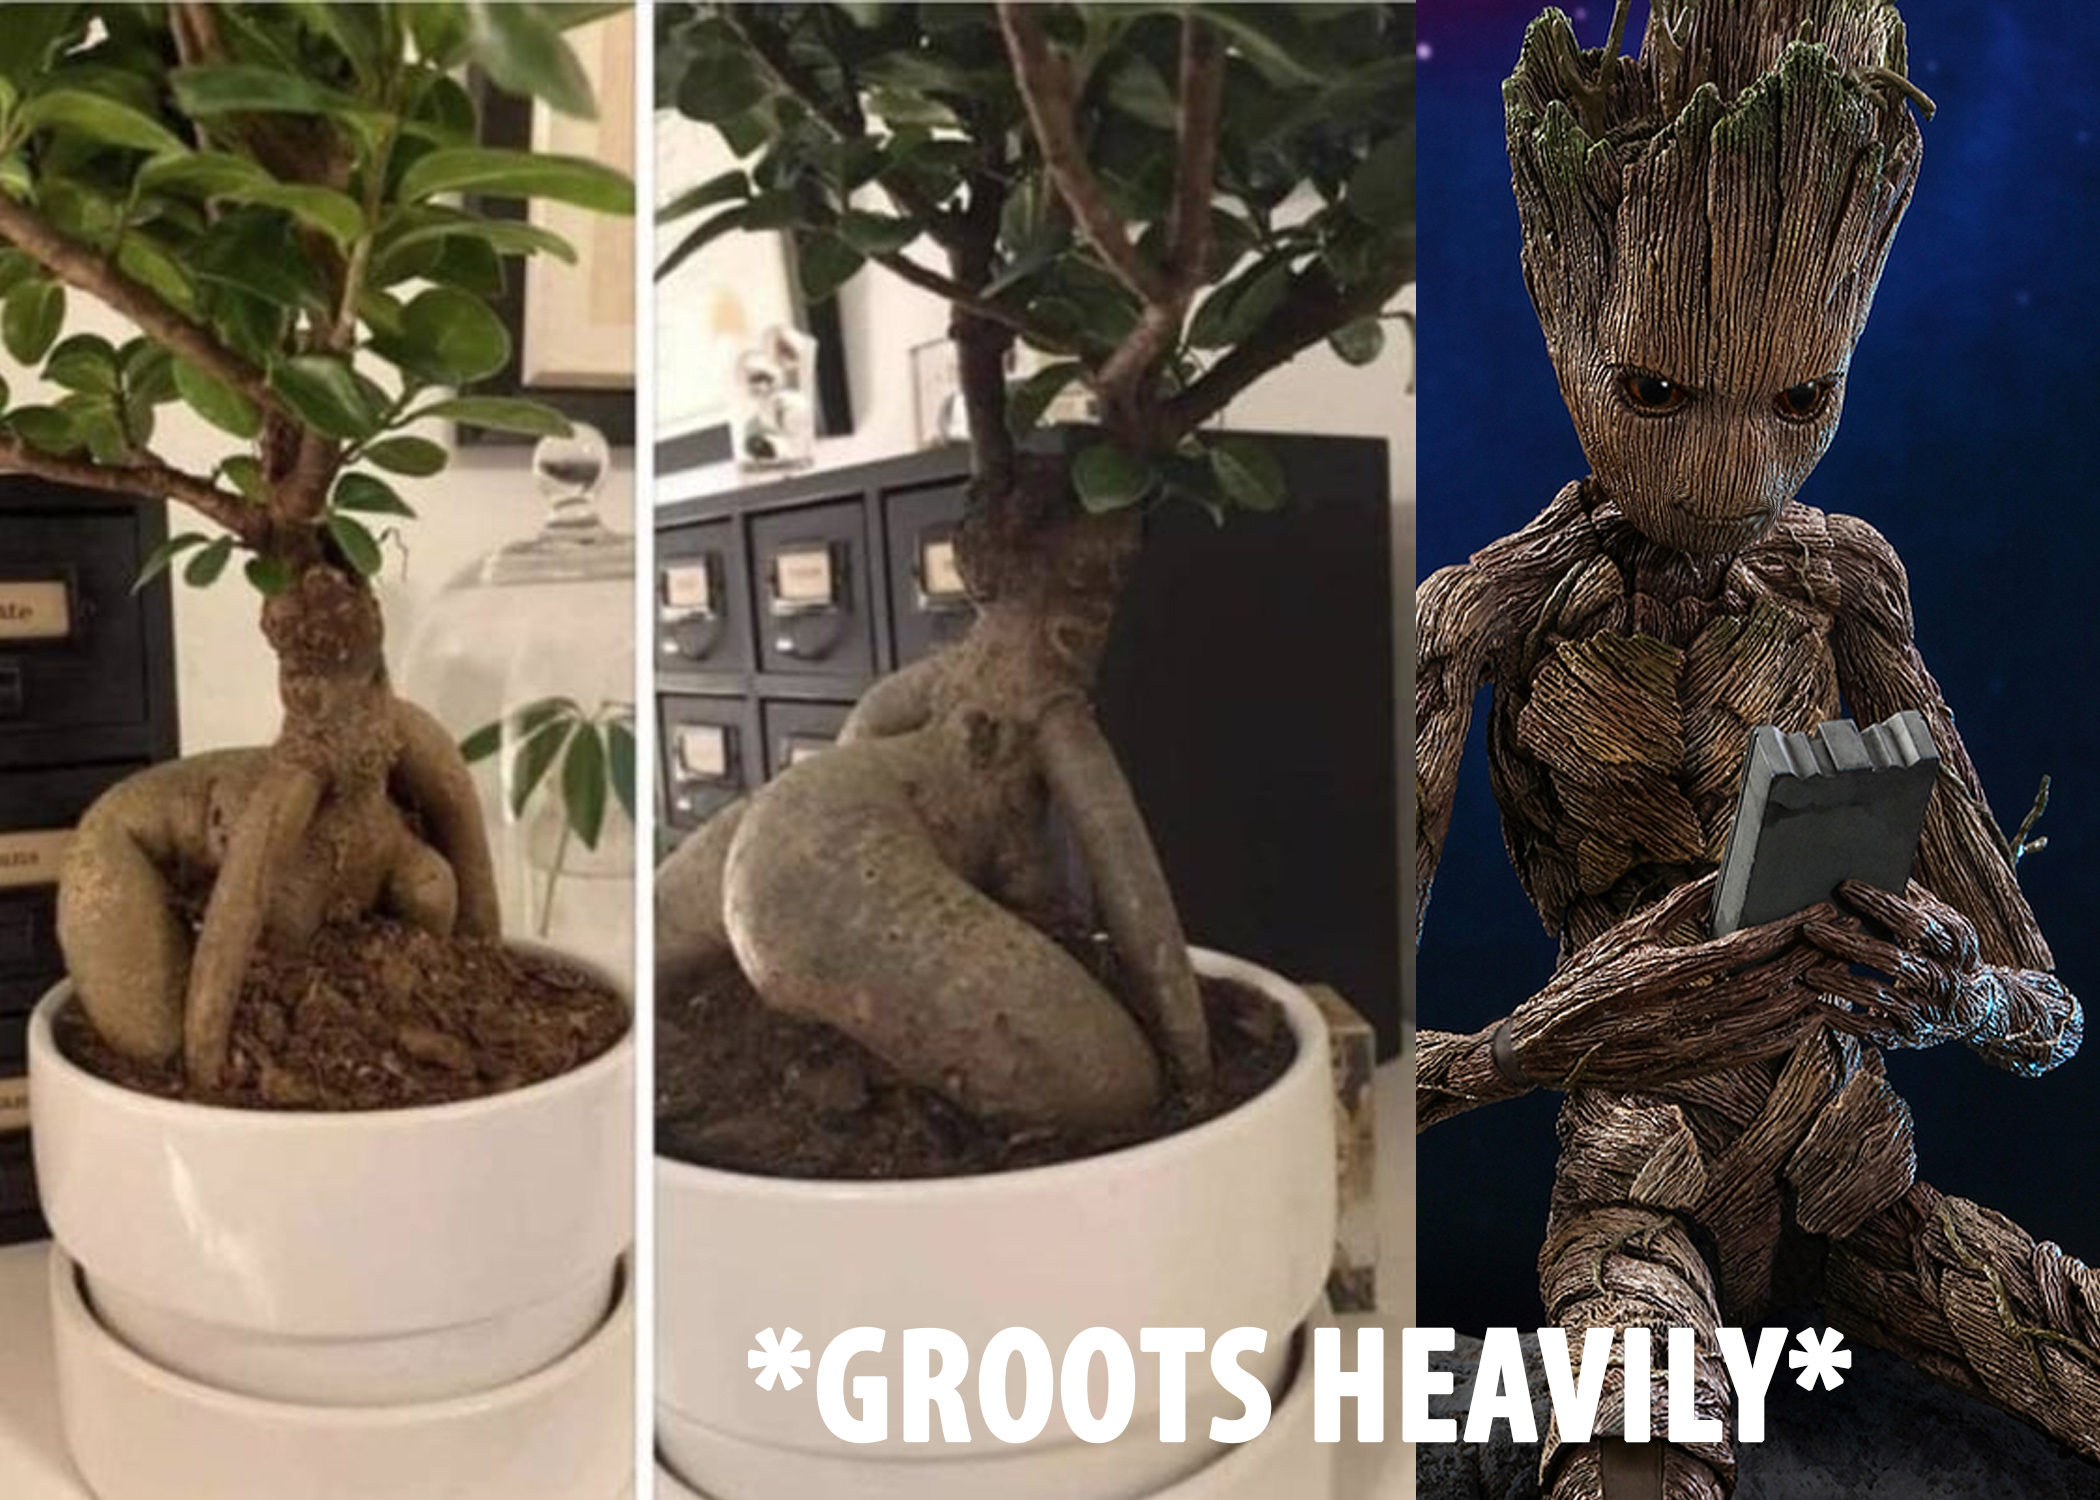 What Groot does in his free time.